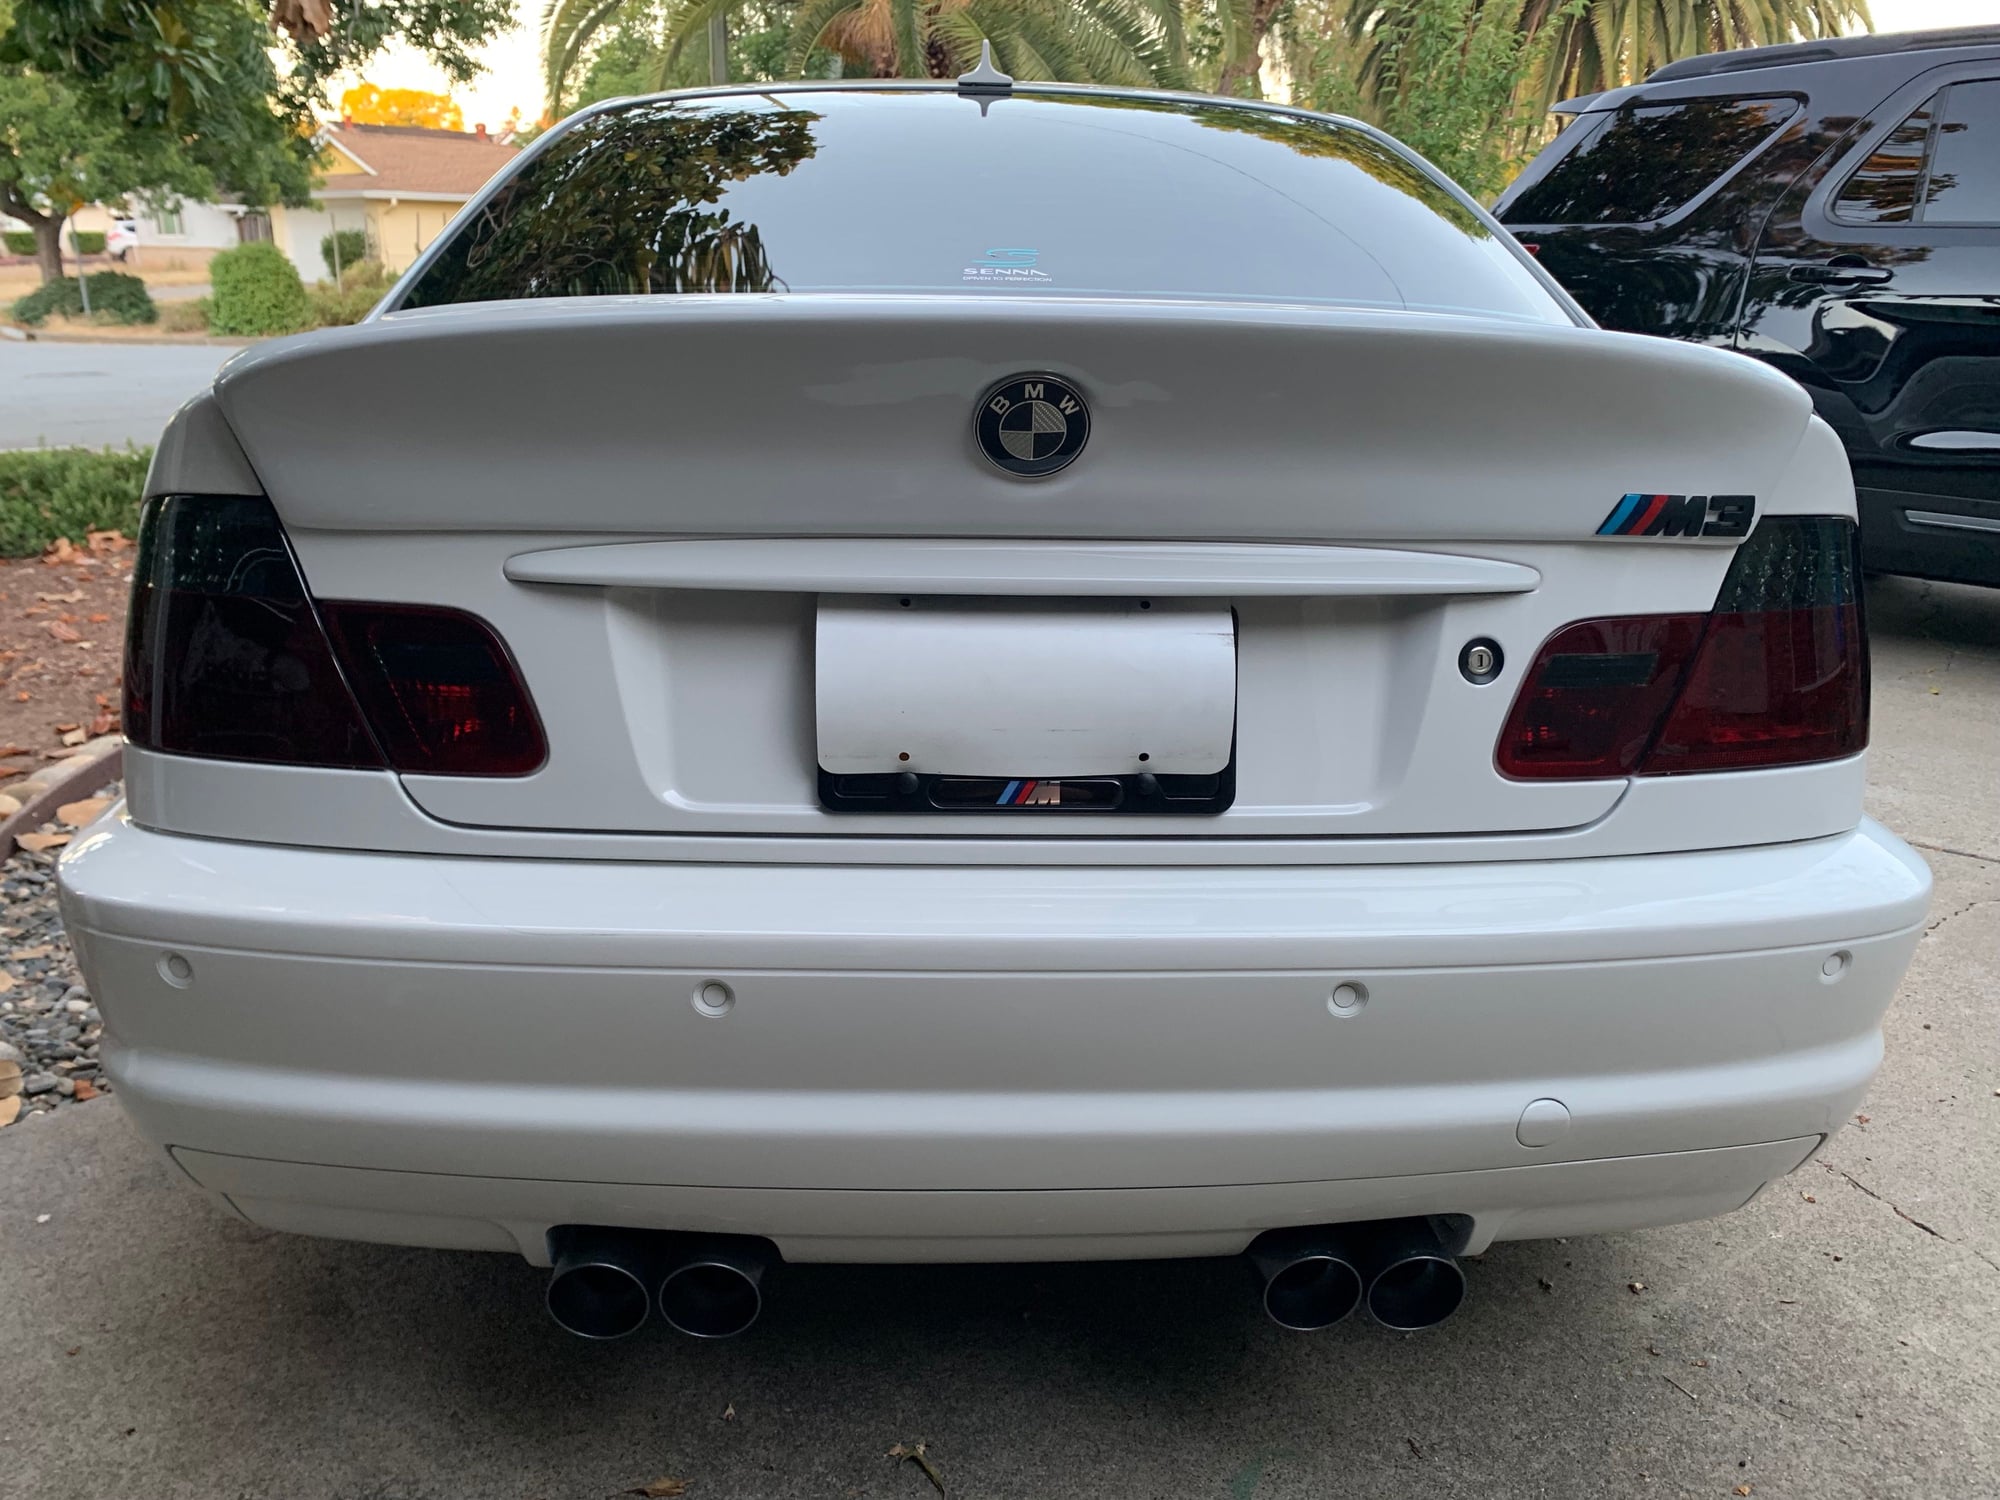 2005 BMW M3 - 2005 BMW M3 - Used - VIN WBSBL93435PN60119 - 106,400 Miles - 2WD - Manual - Coupe - White - San Jose, CA 95124, United States